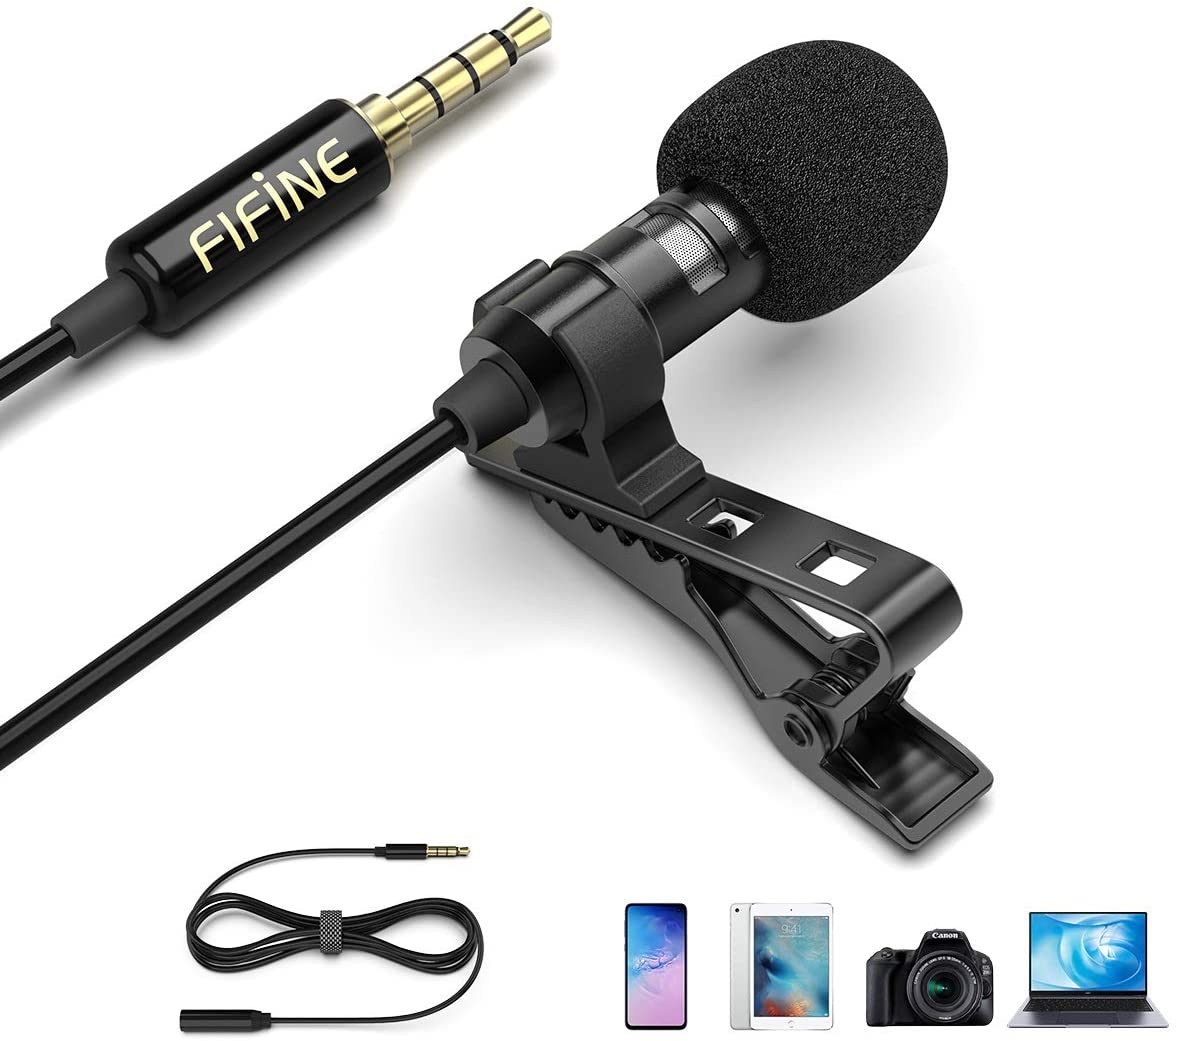 Fifine C1 Lavalier Lapel Microphone, 3.5mm Clip On Mic for YouTube Video Recording Vlog, Mini External Mic for iPhone iPad Android Cell Phone DSLR Camera PC Laptop Mac Computer, Noise Reduction